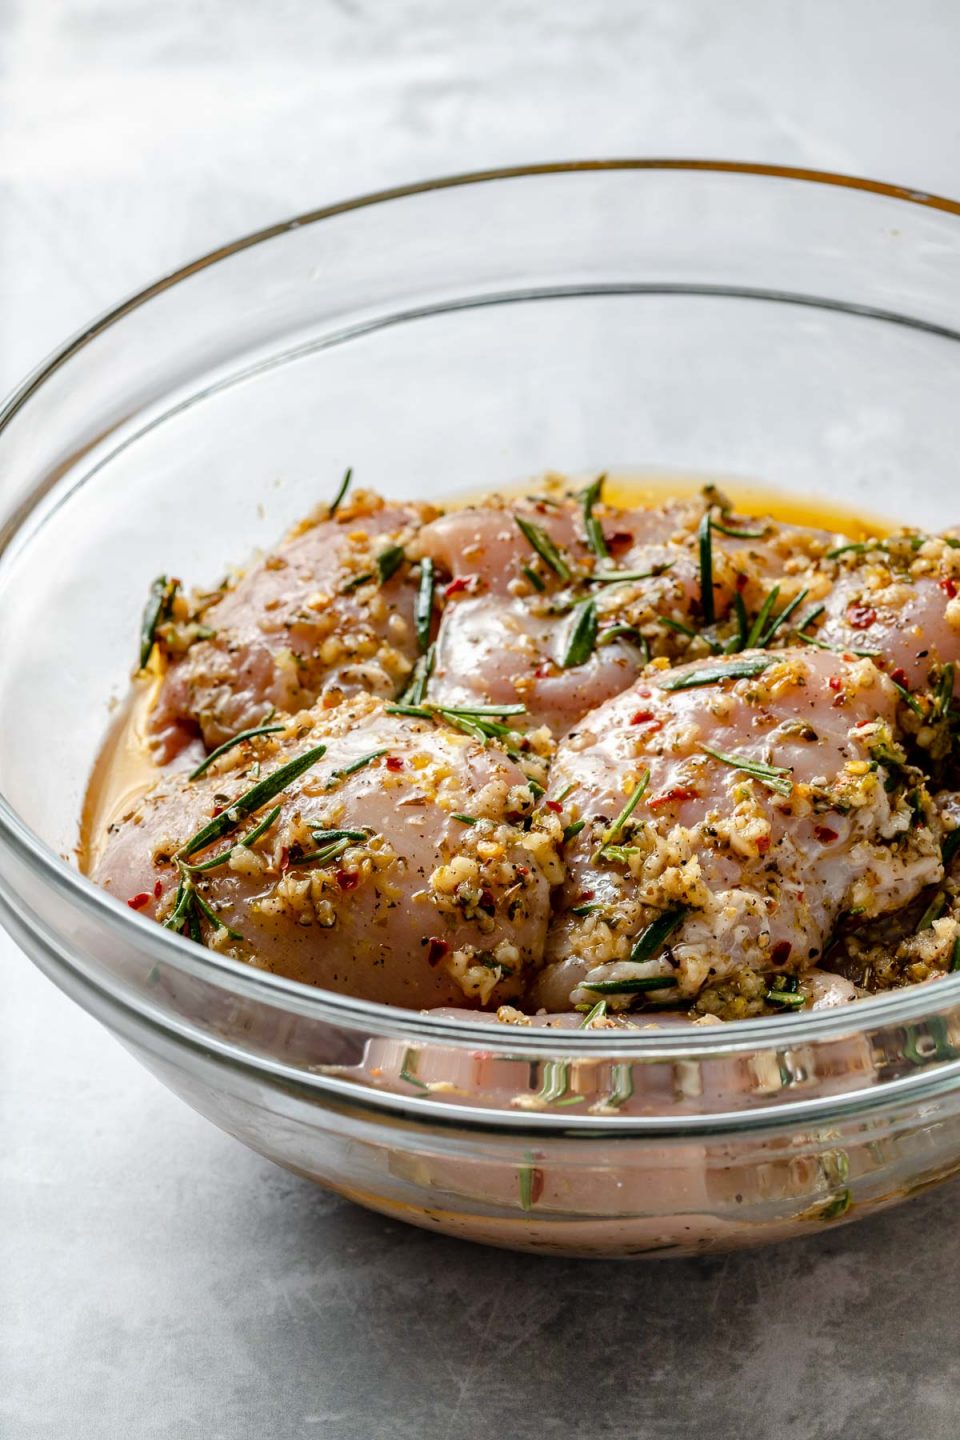 Side angle of chicken thighs in a large glass mixing bowl, marinating in Tuscan marinade. The bowl sits atop a light blue surface.